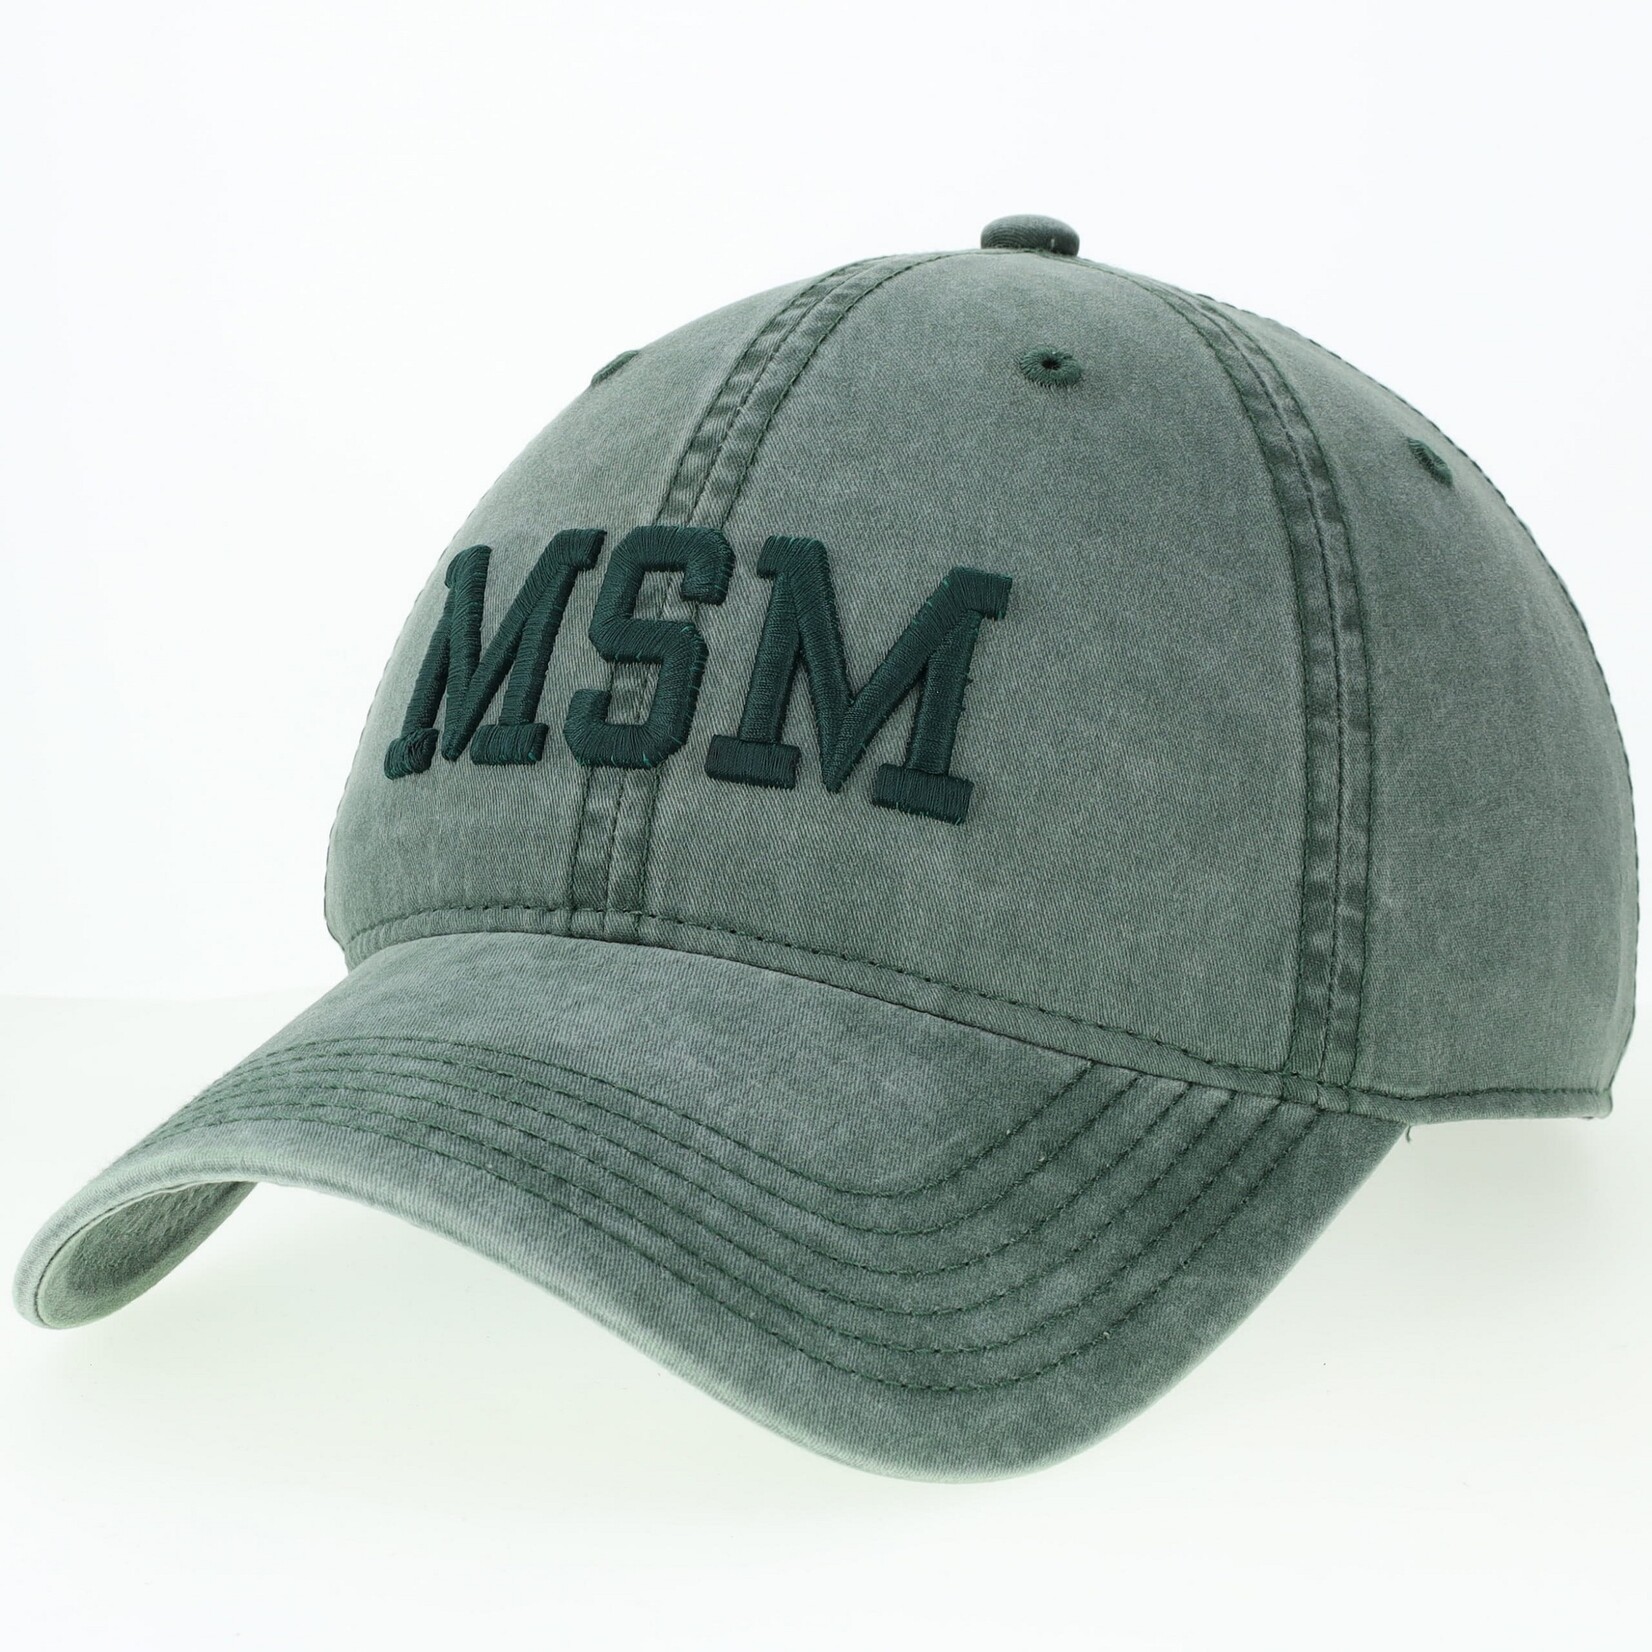 Cap: MSM embroidered  (various colors)